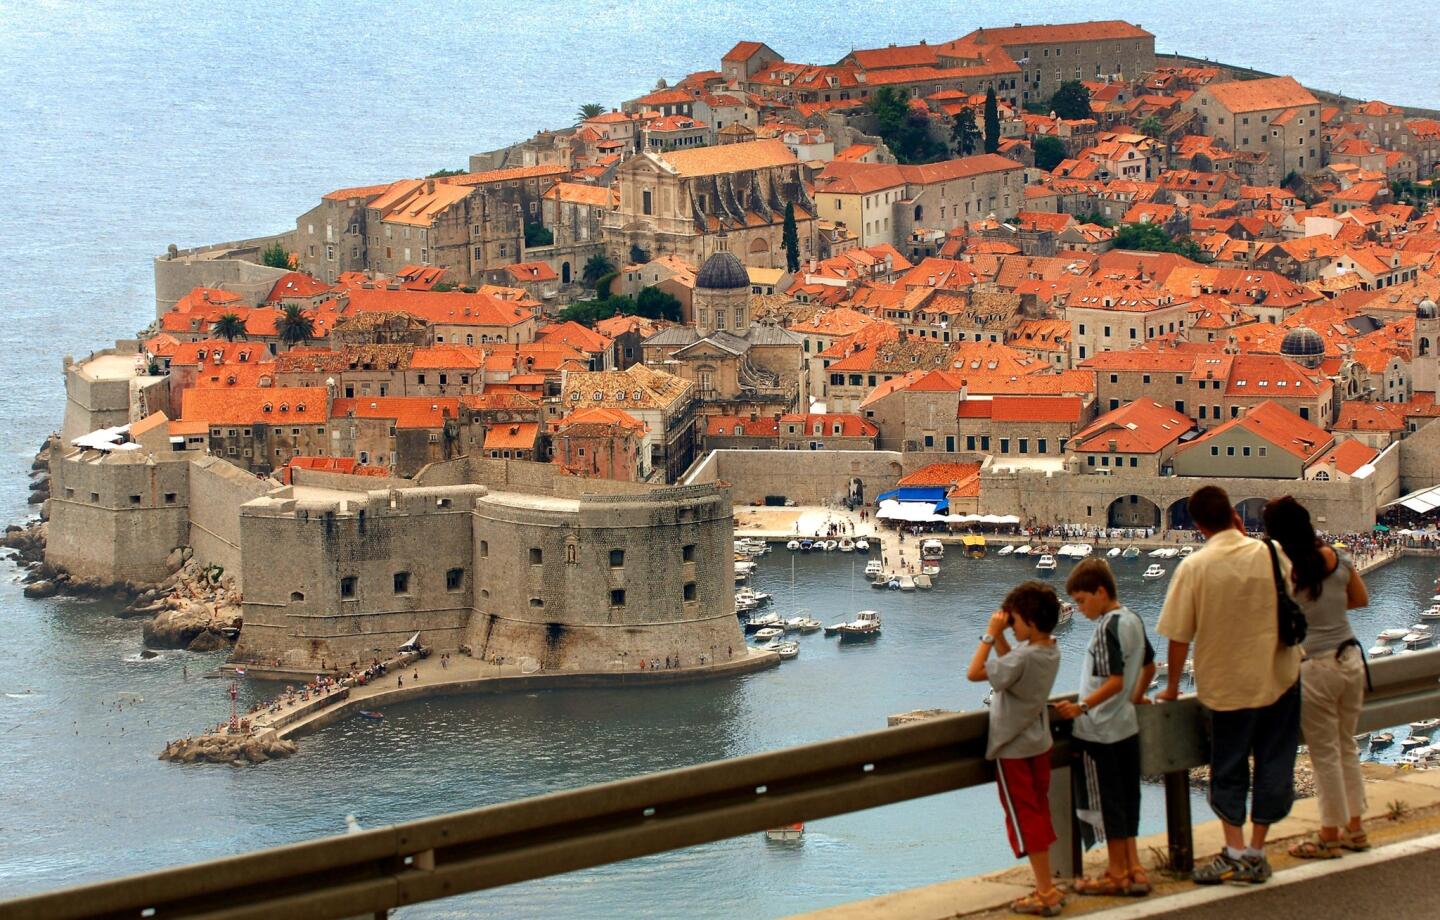 Dubrovnik's Old City, with its red-tiled roofs set against the azure Adriatic, is a UNESCO World Heritage Site.